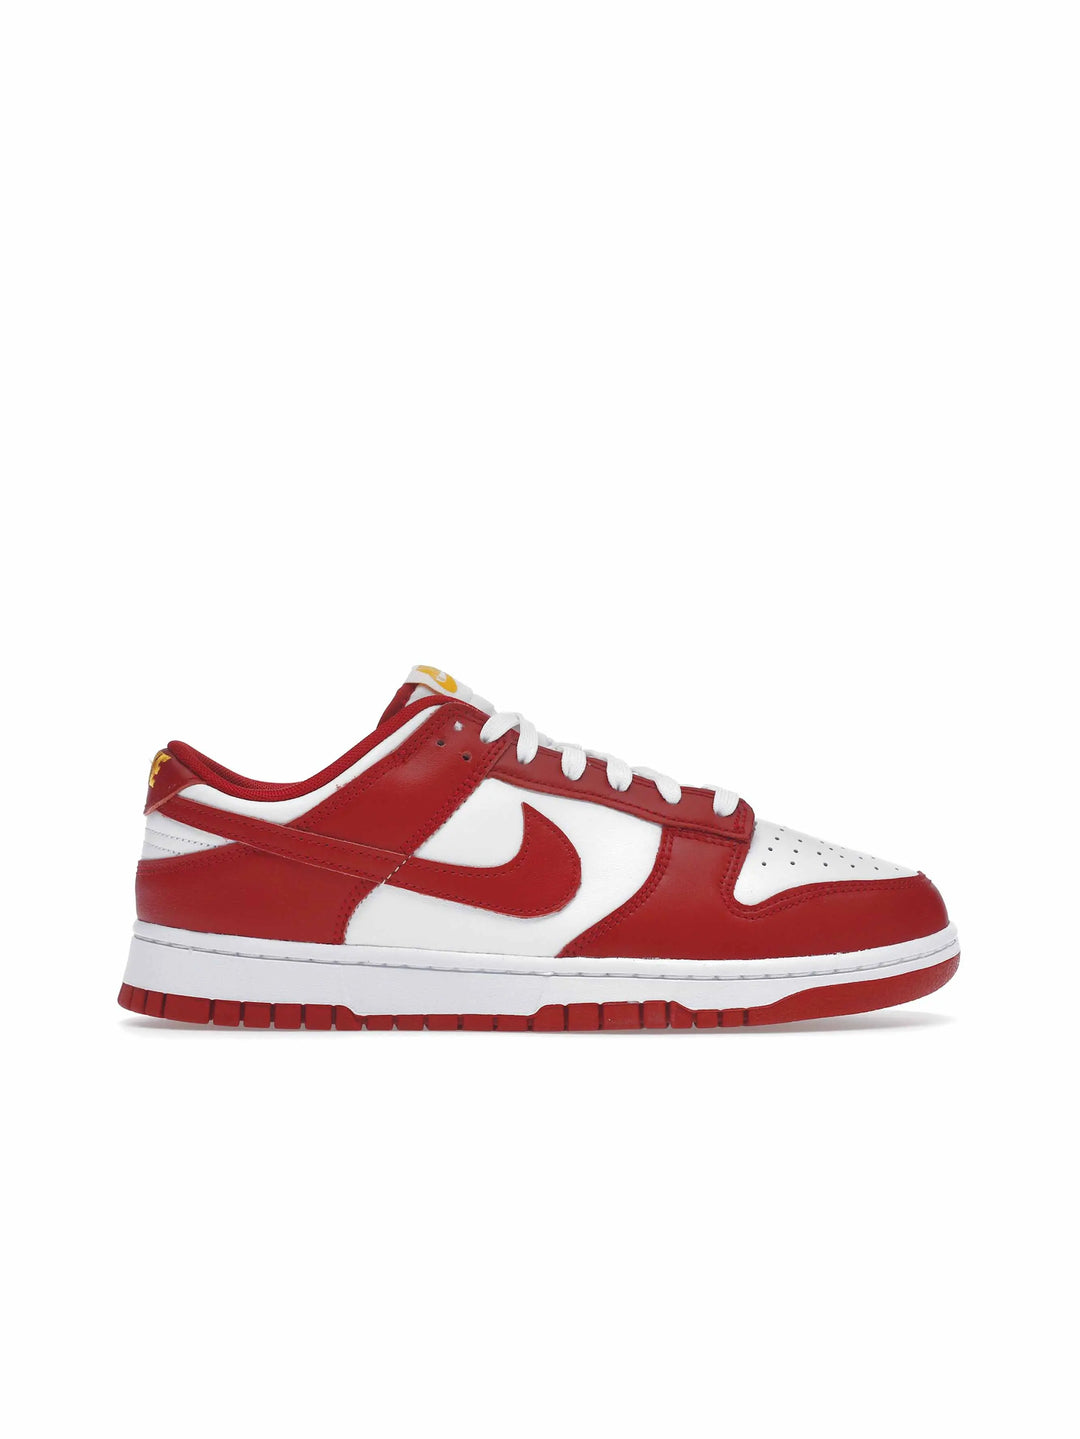 Nike Dunk Low USC - Prior